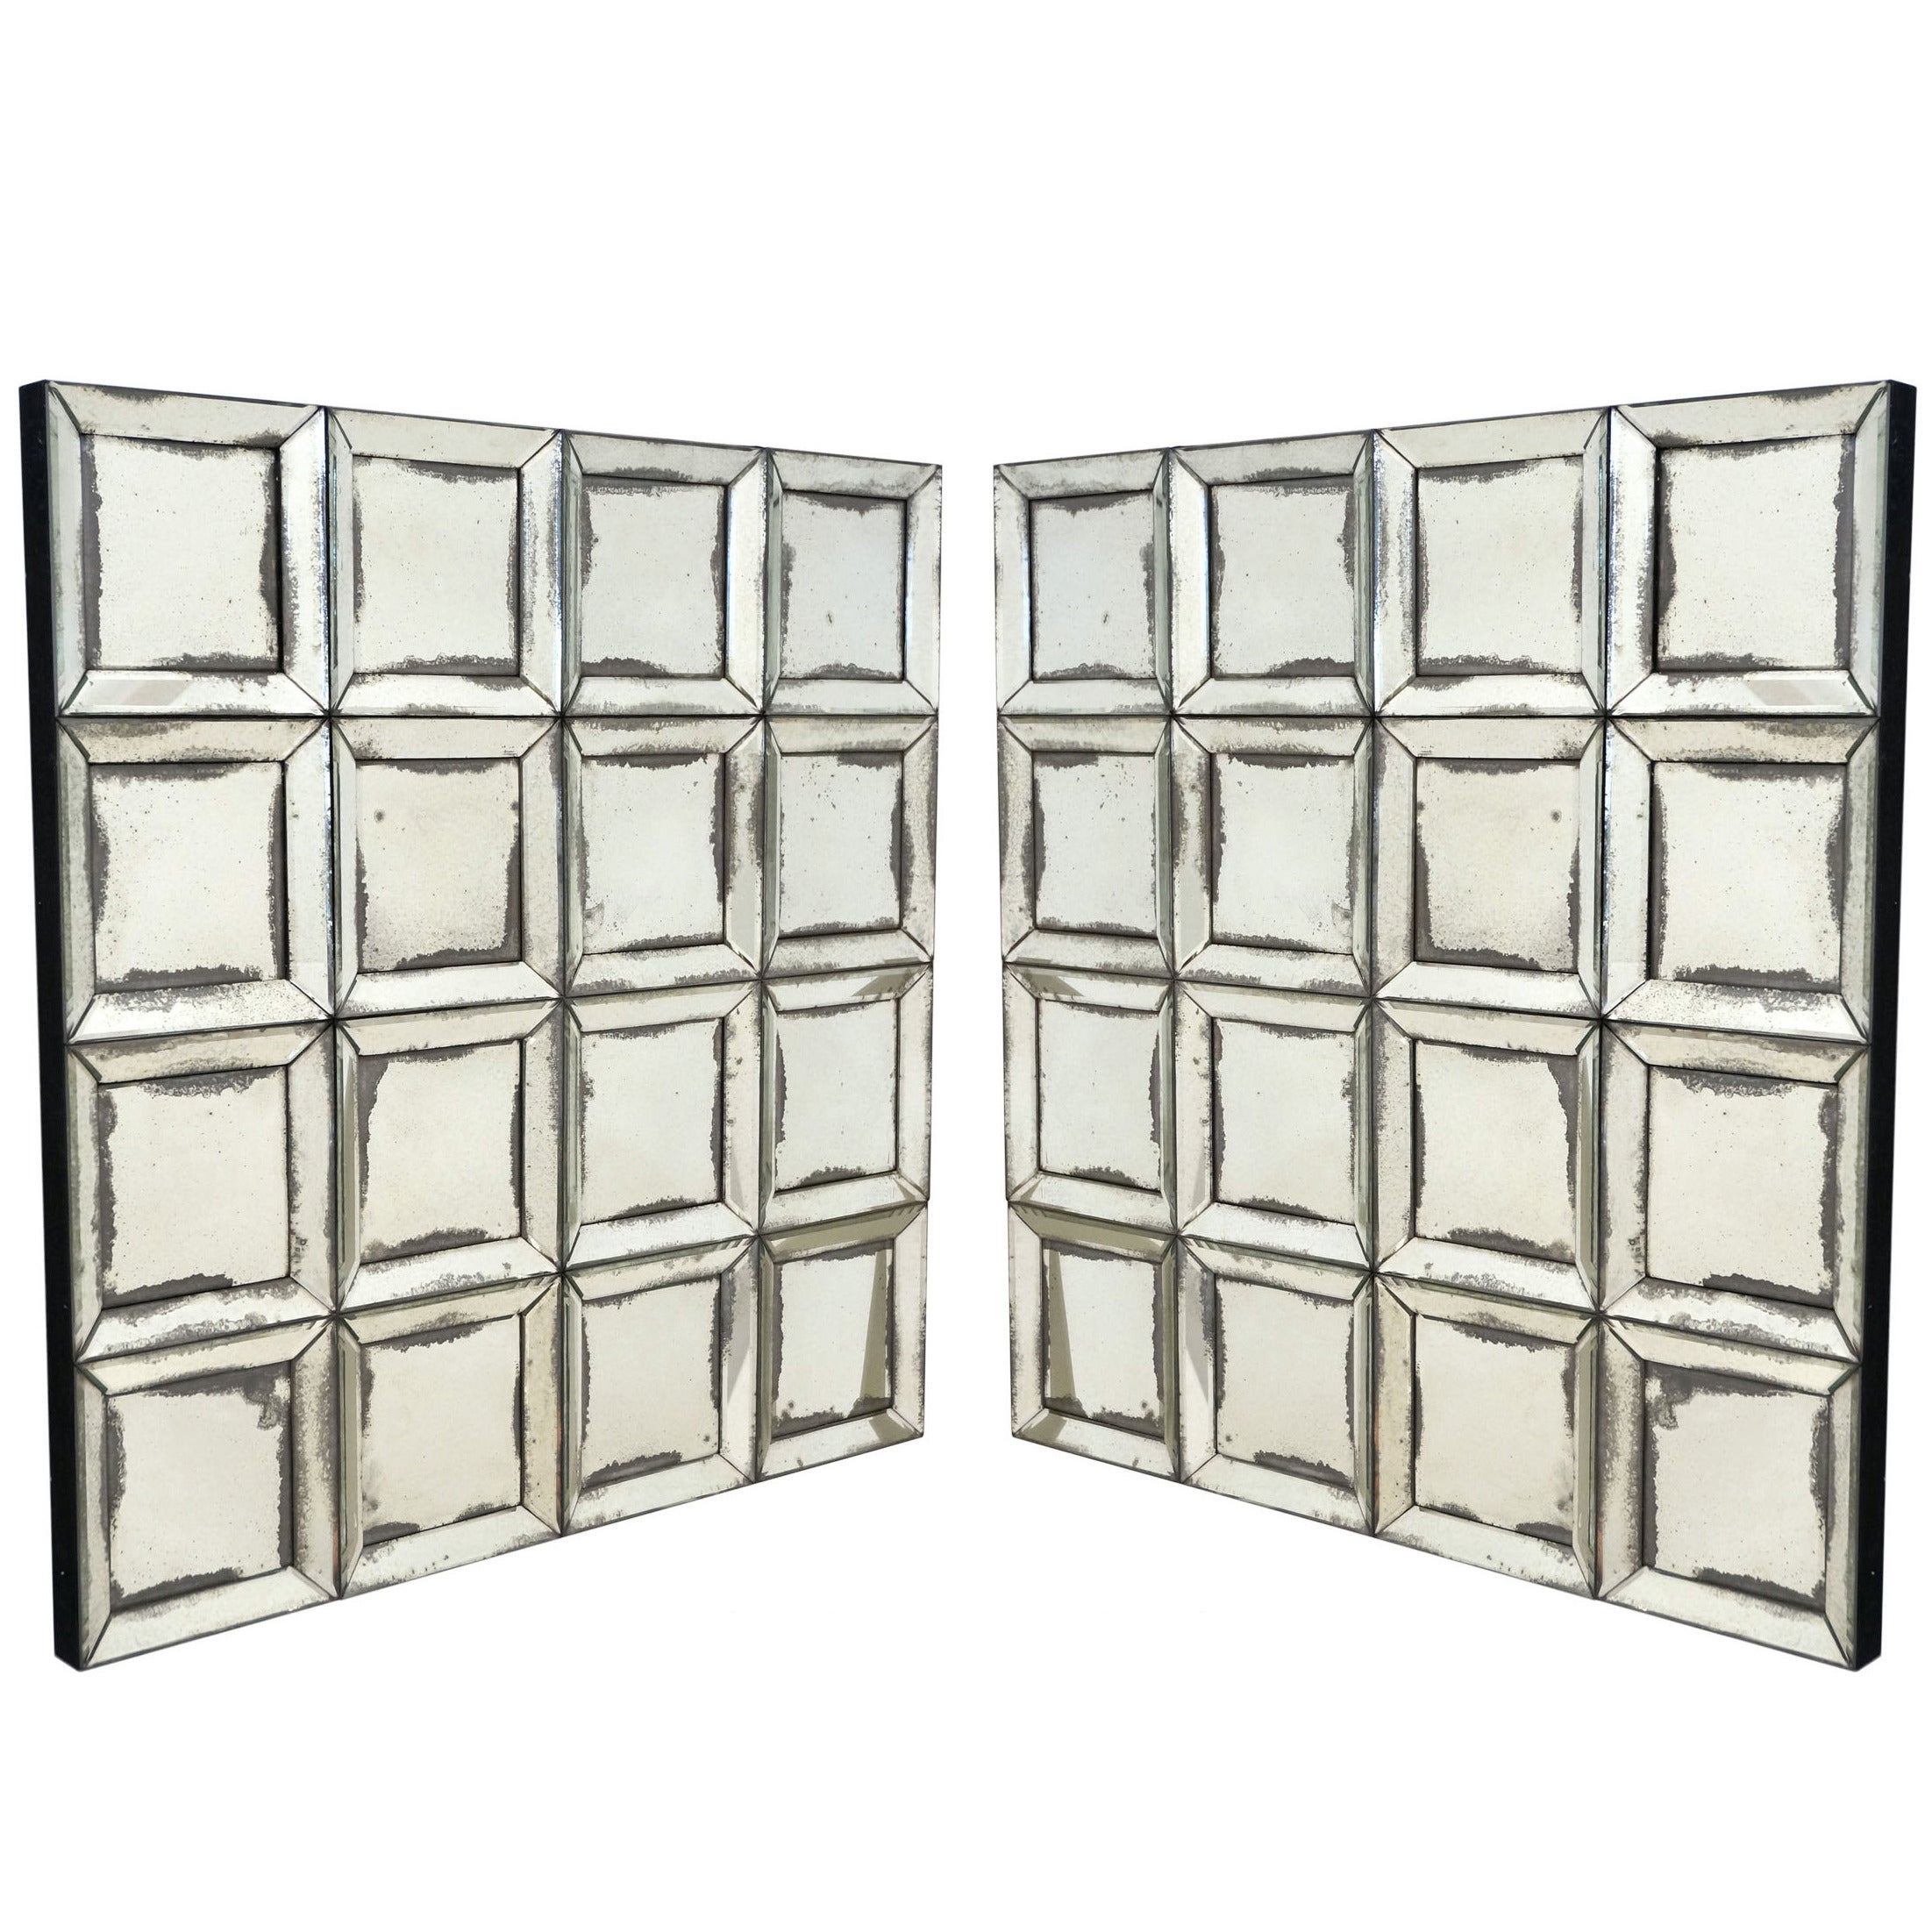 Pair of Square Tiled Wall Mirrors from Parisian Bistro, France, circa 1940